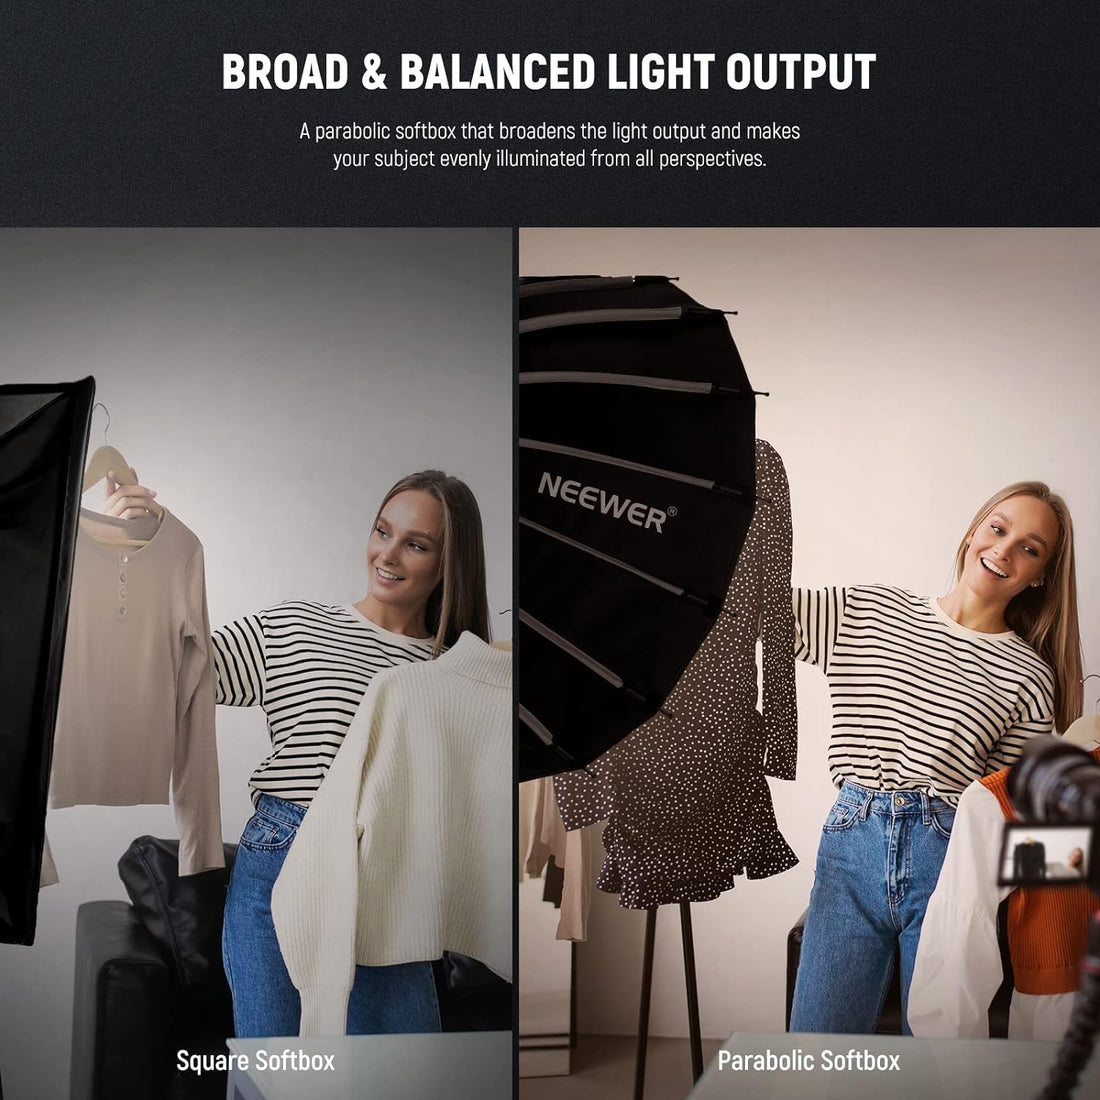 NEEWER 22inch/55cm Parabolic Softbox Quick Set up Quick Folding, with Diffusers/Honeycomb Grid/Bag, Compatible with Aputure 120d Light Dome Godox sl60w NEEWER RGB CB60 and Other Bowens Mount Lights